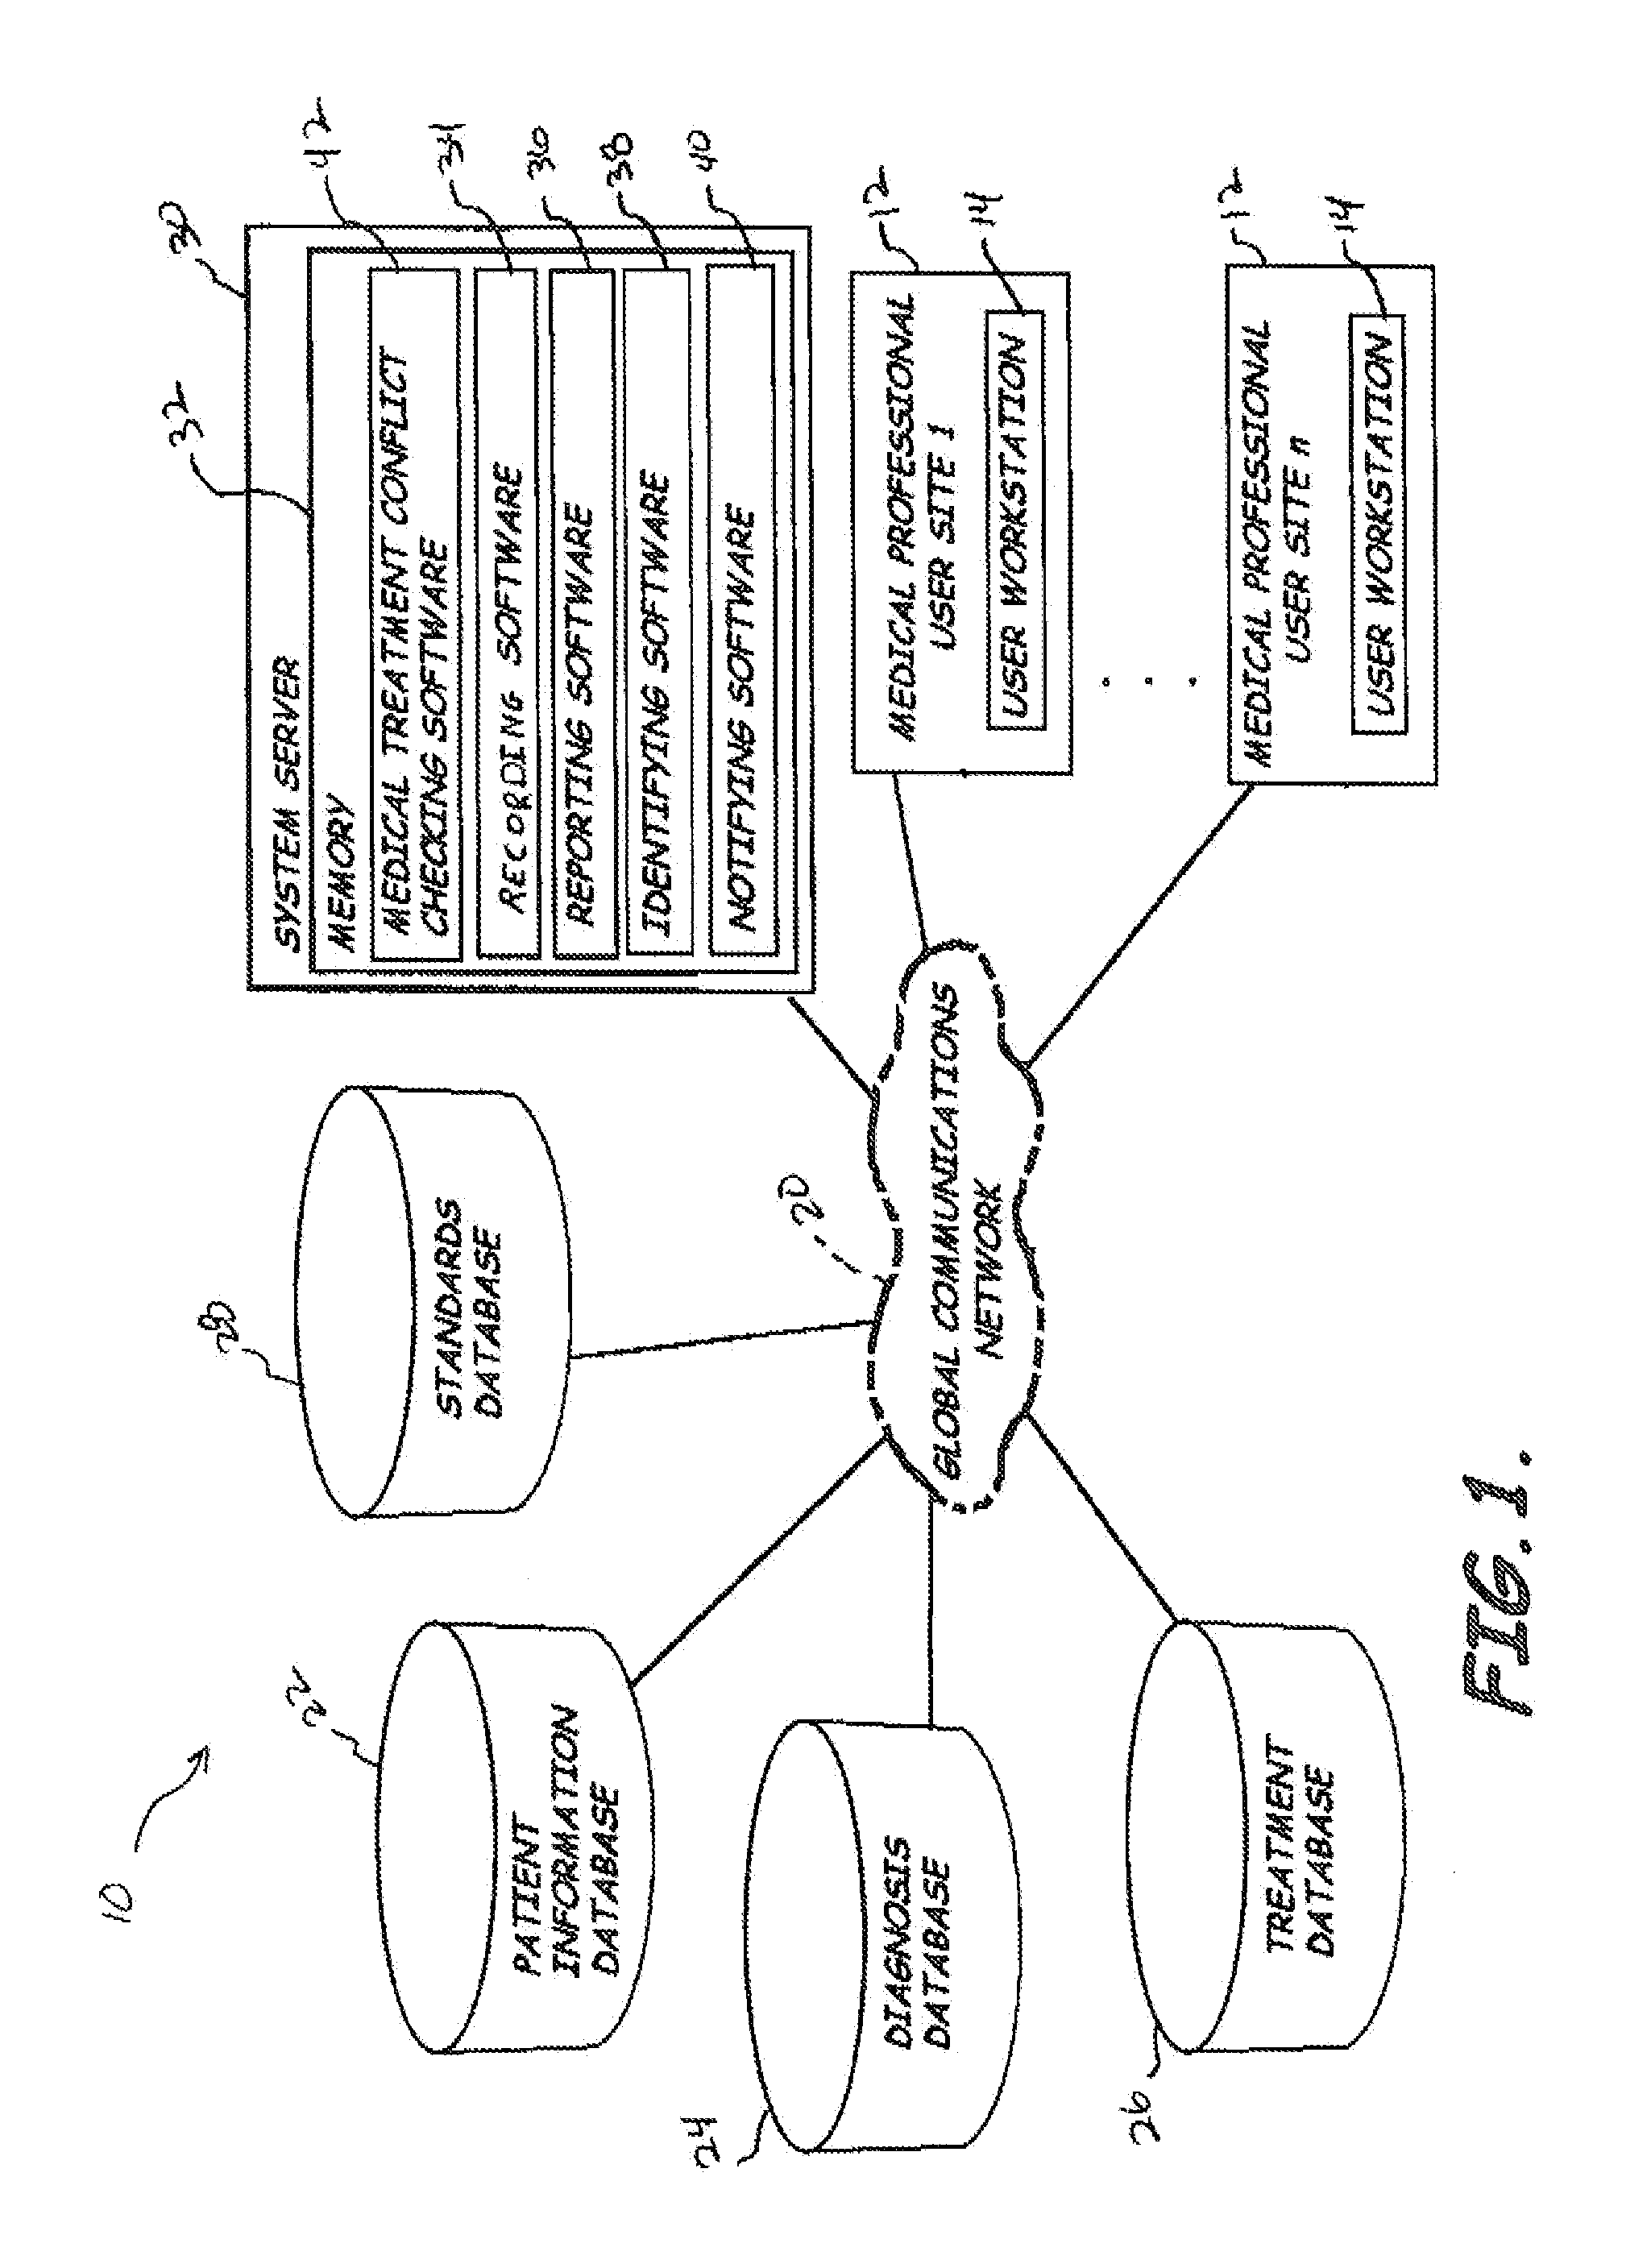 Medical information searching and indexing method and system